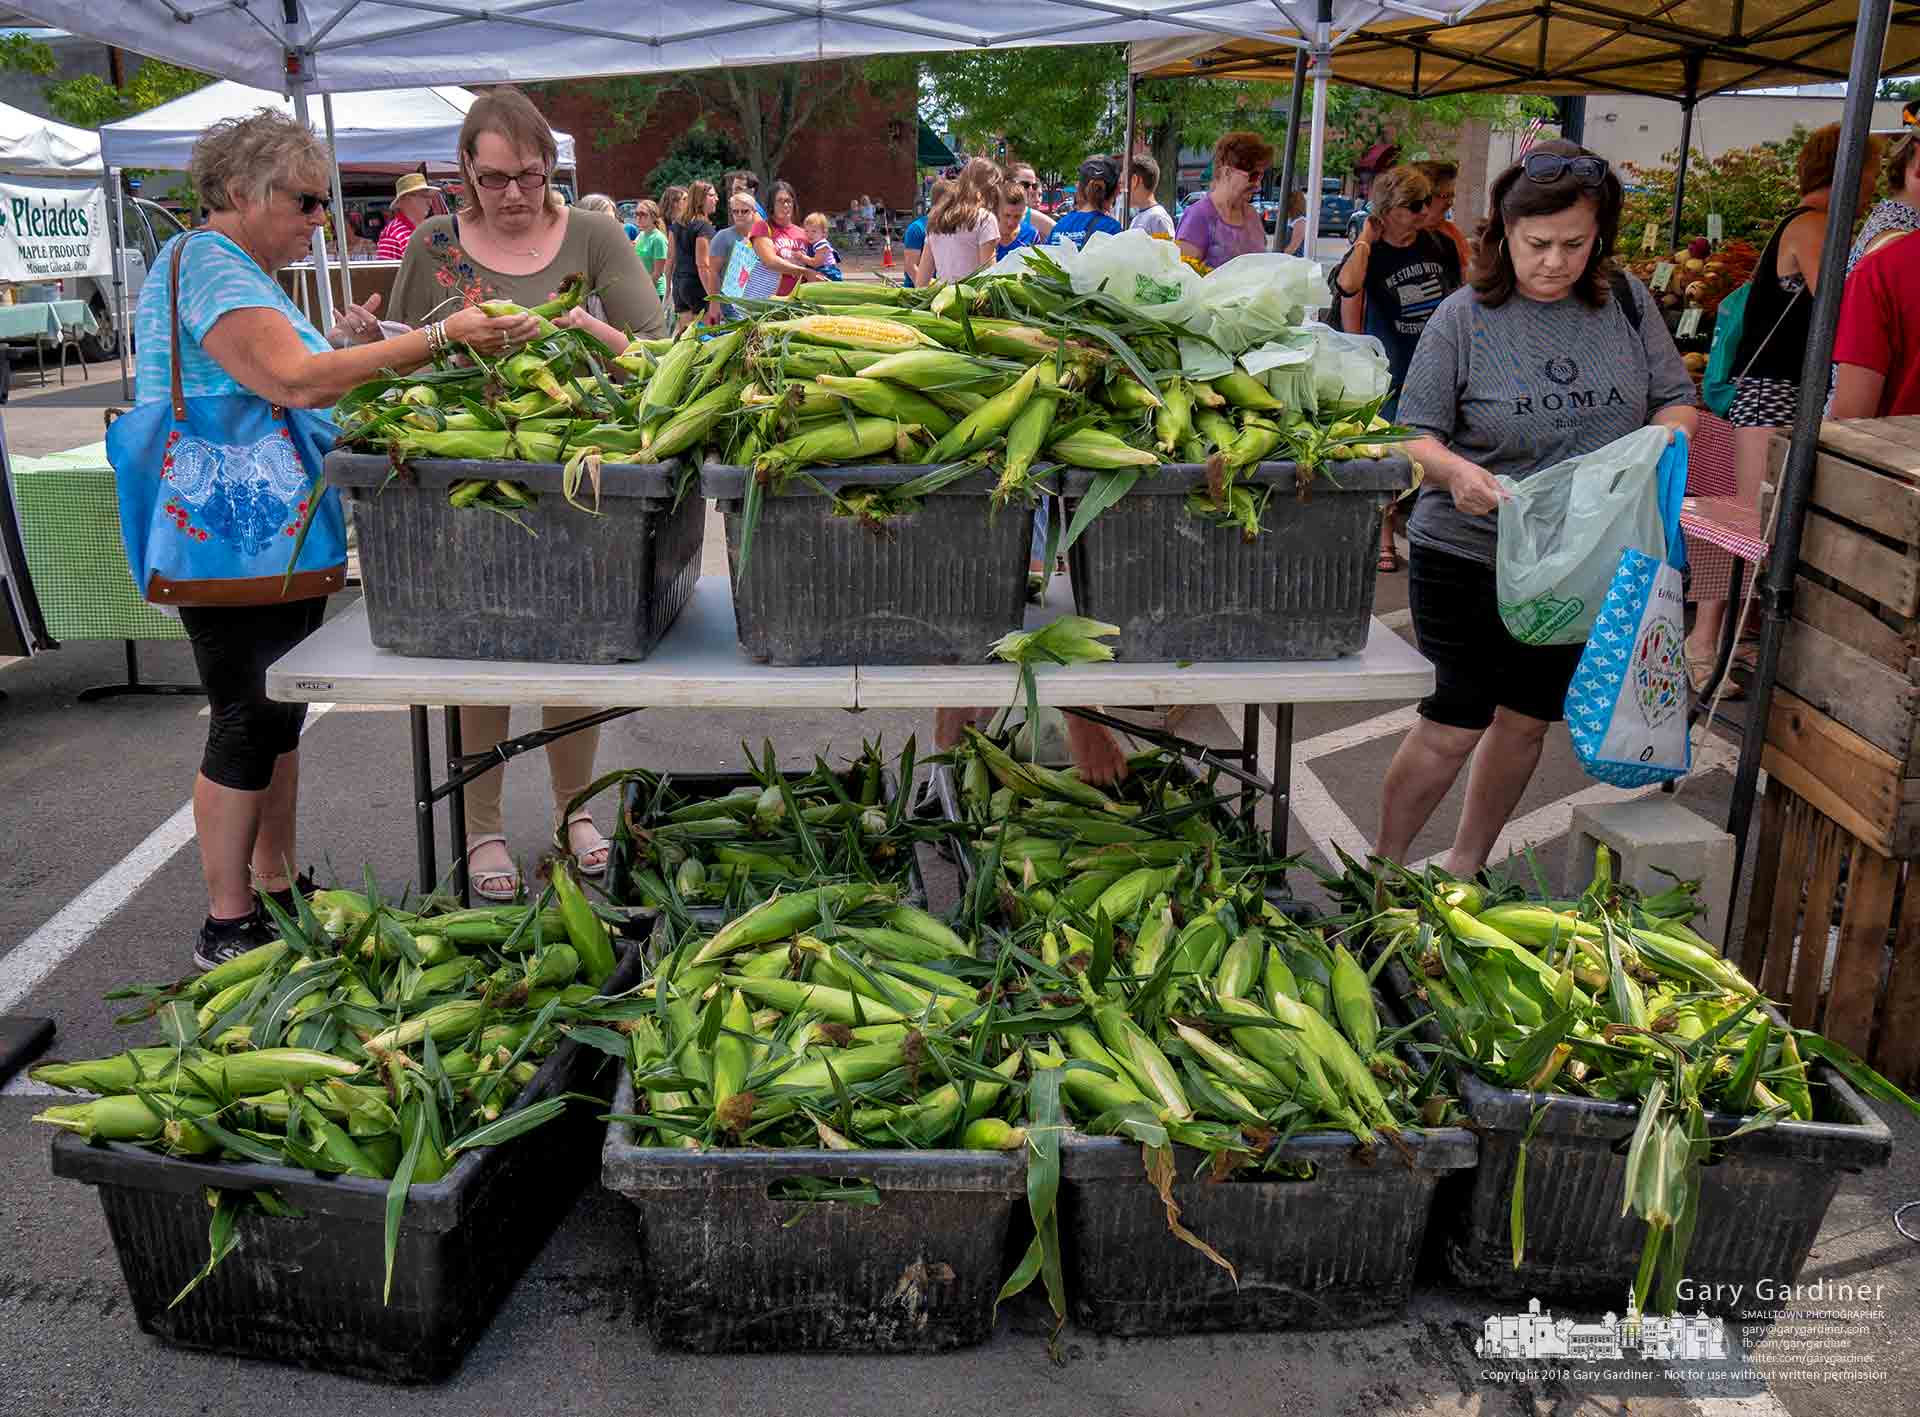 Customers sort through one farmer's selection of fresh corn at the Uptown Westerville Farmers Market. My Final Photo for July 18, 2018.